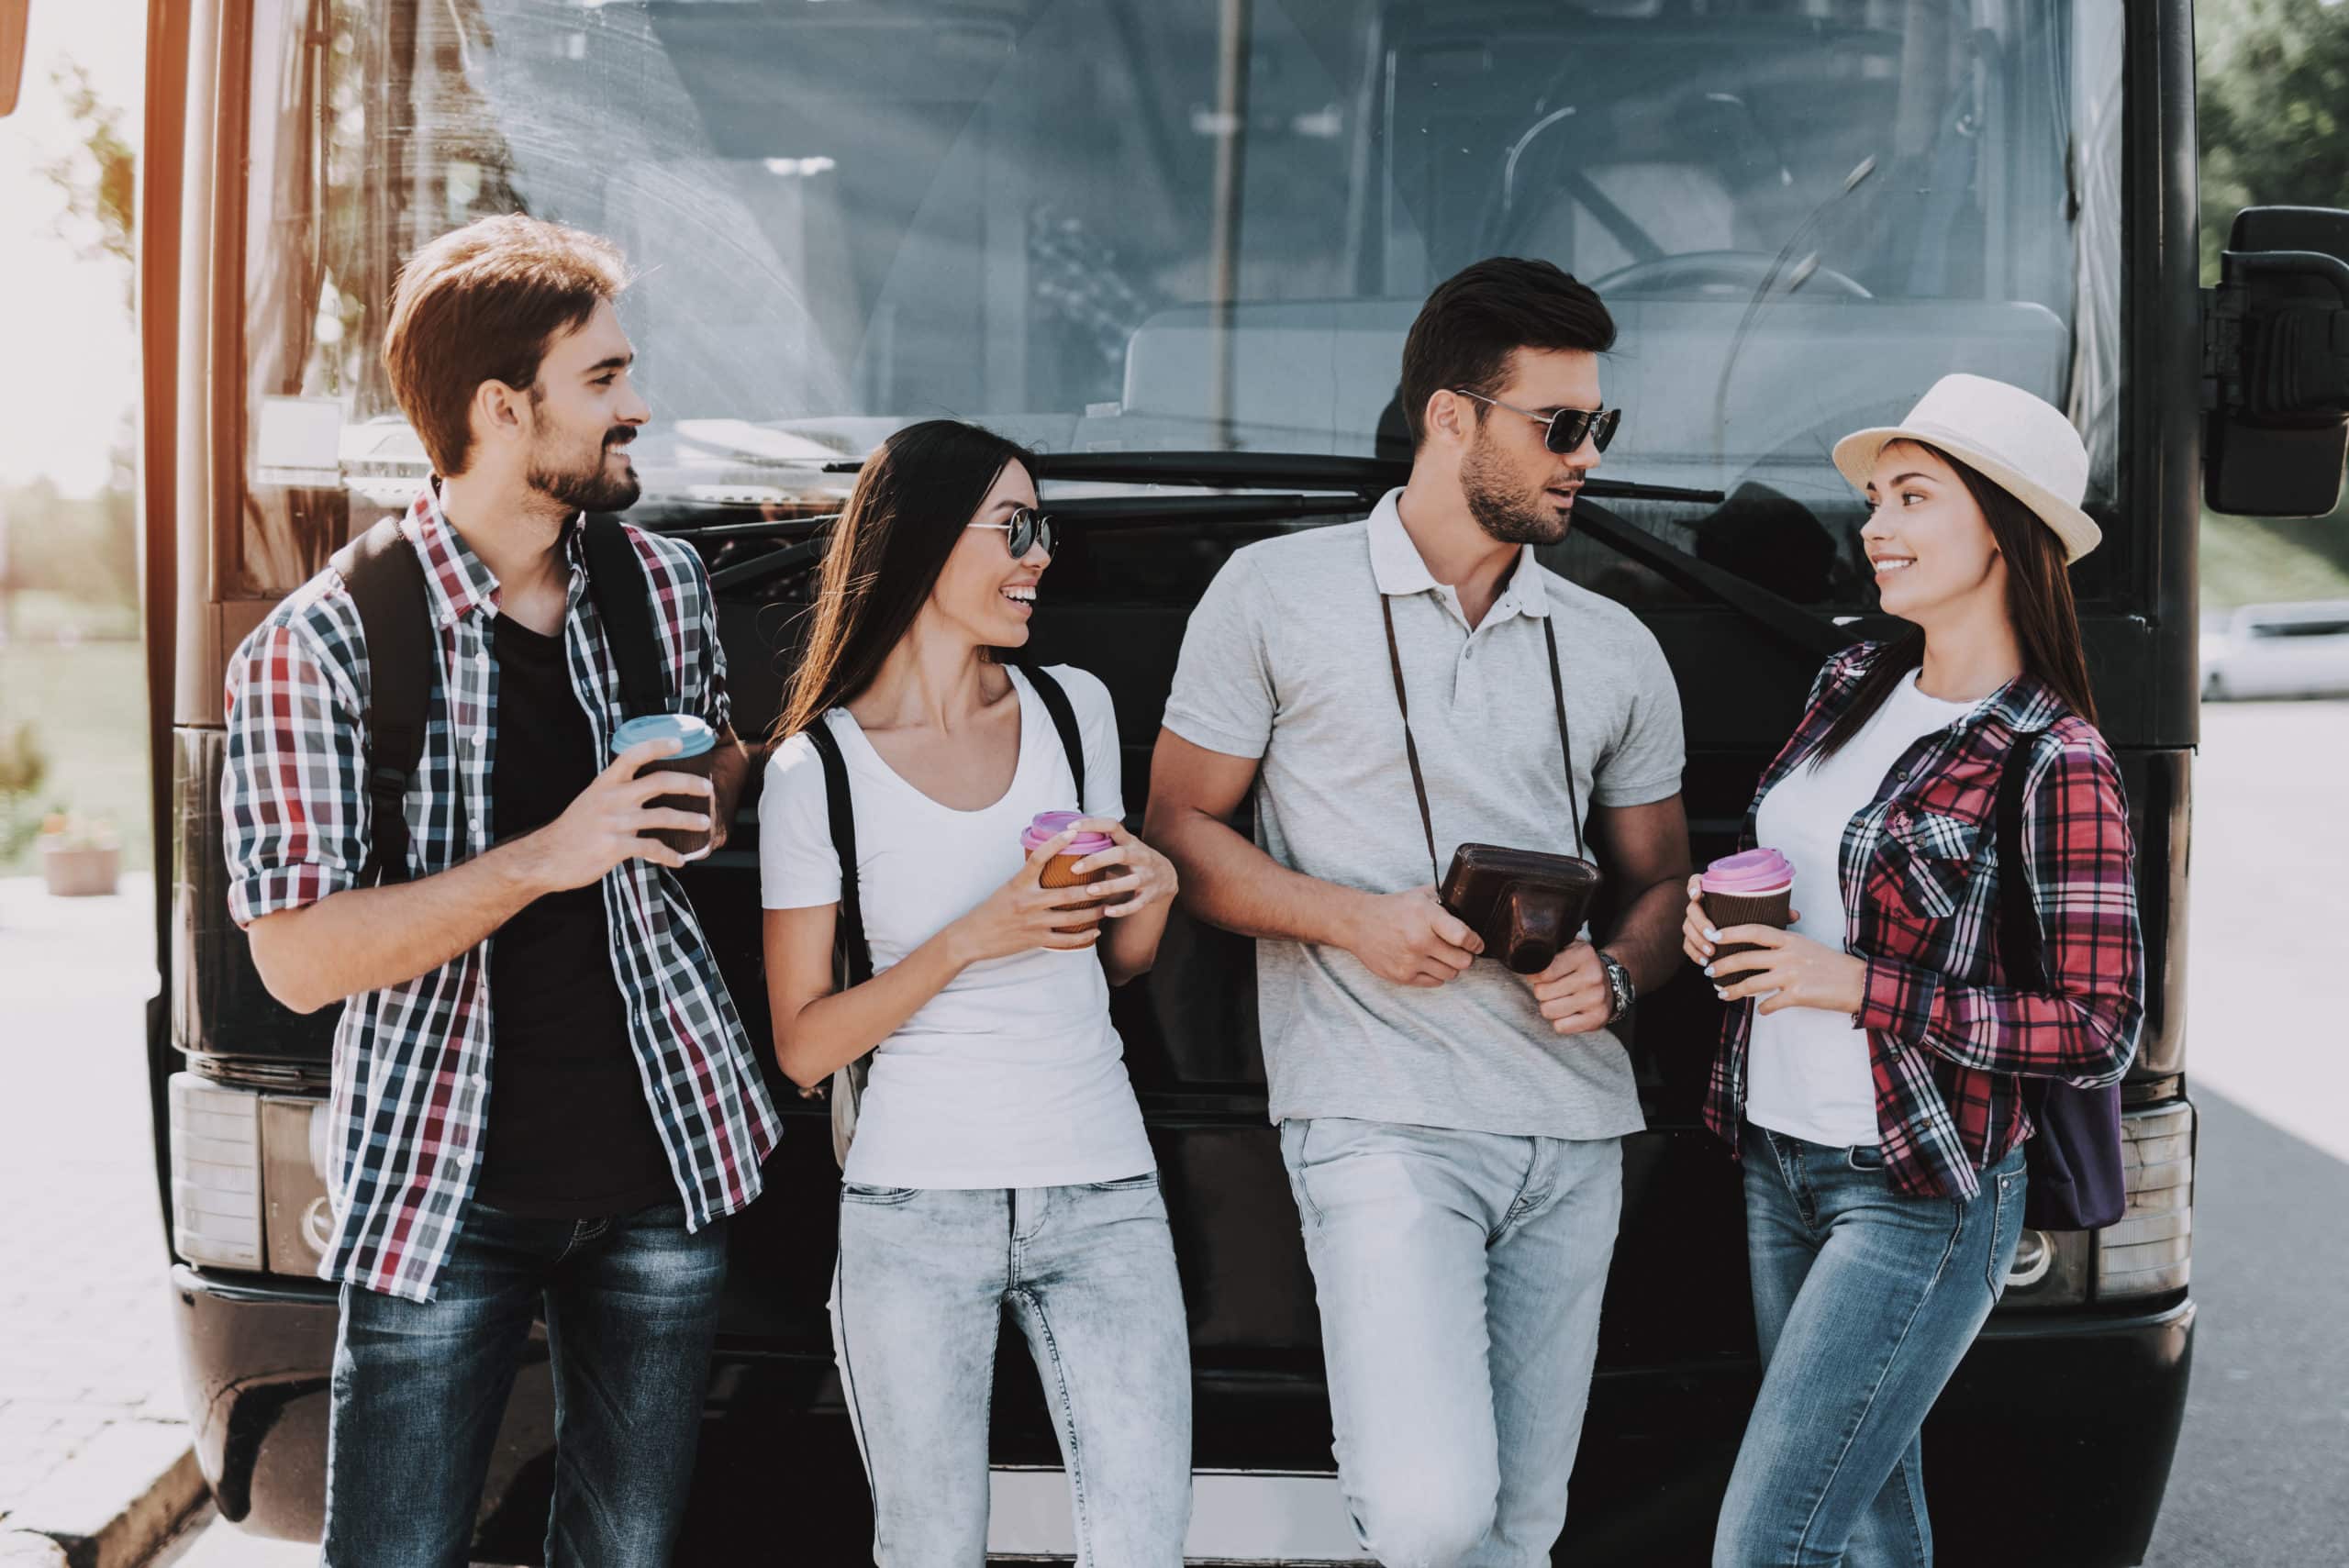 Young People Drinking Coffe in front of Tour Bus. Group of Smiling Friends with Backpacks Standing Together and Talking. Traveling, Tourism and People Concept. Happy Travelers on Summer Vacation